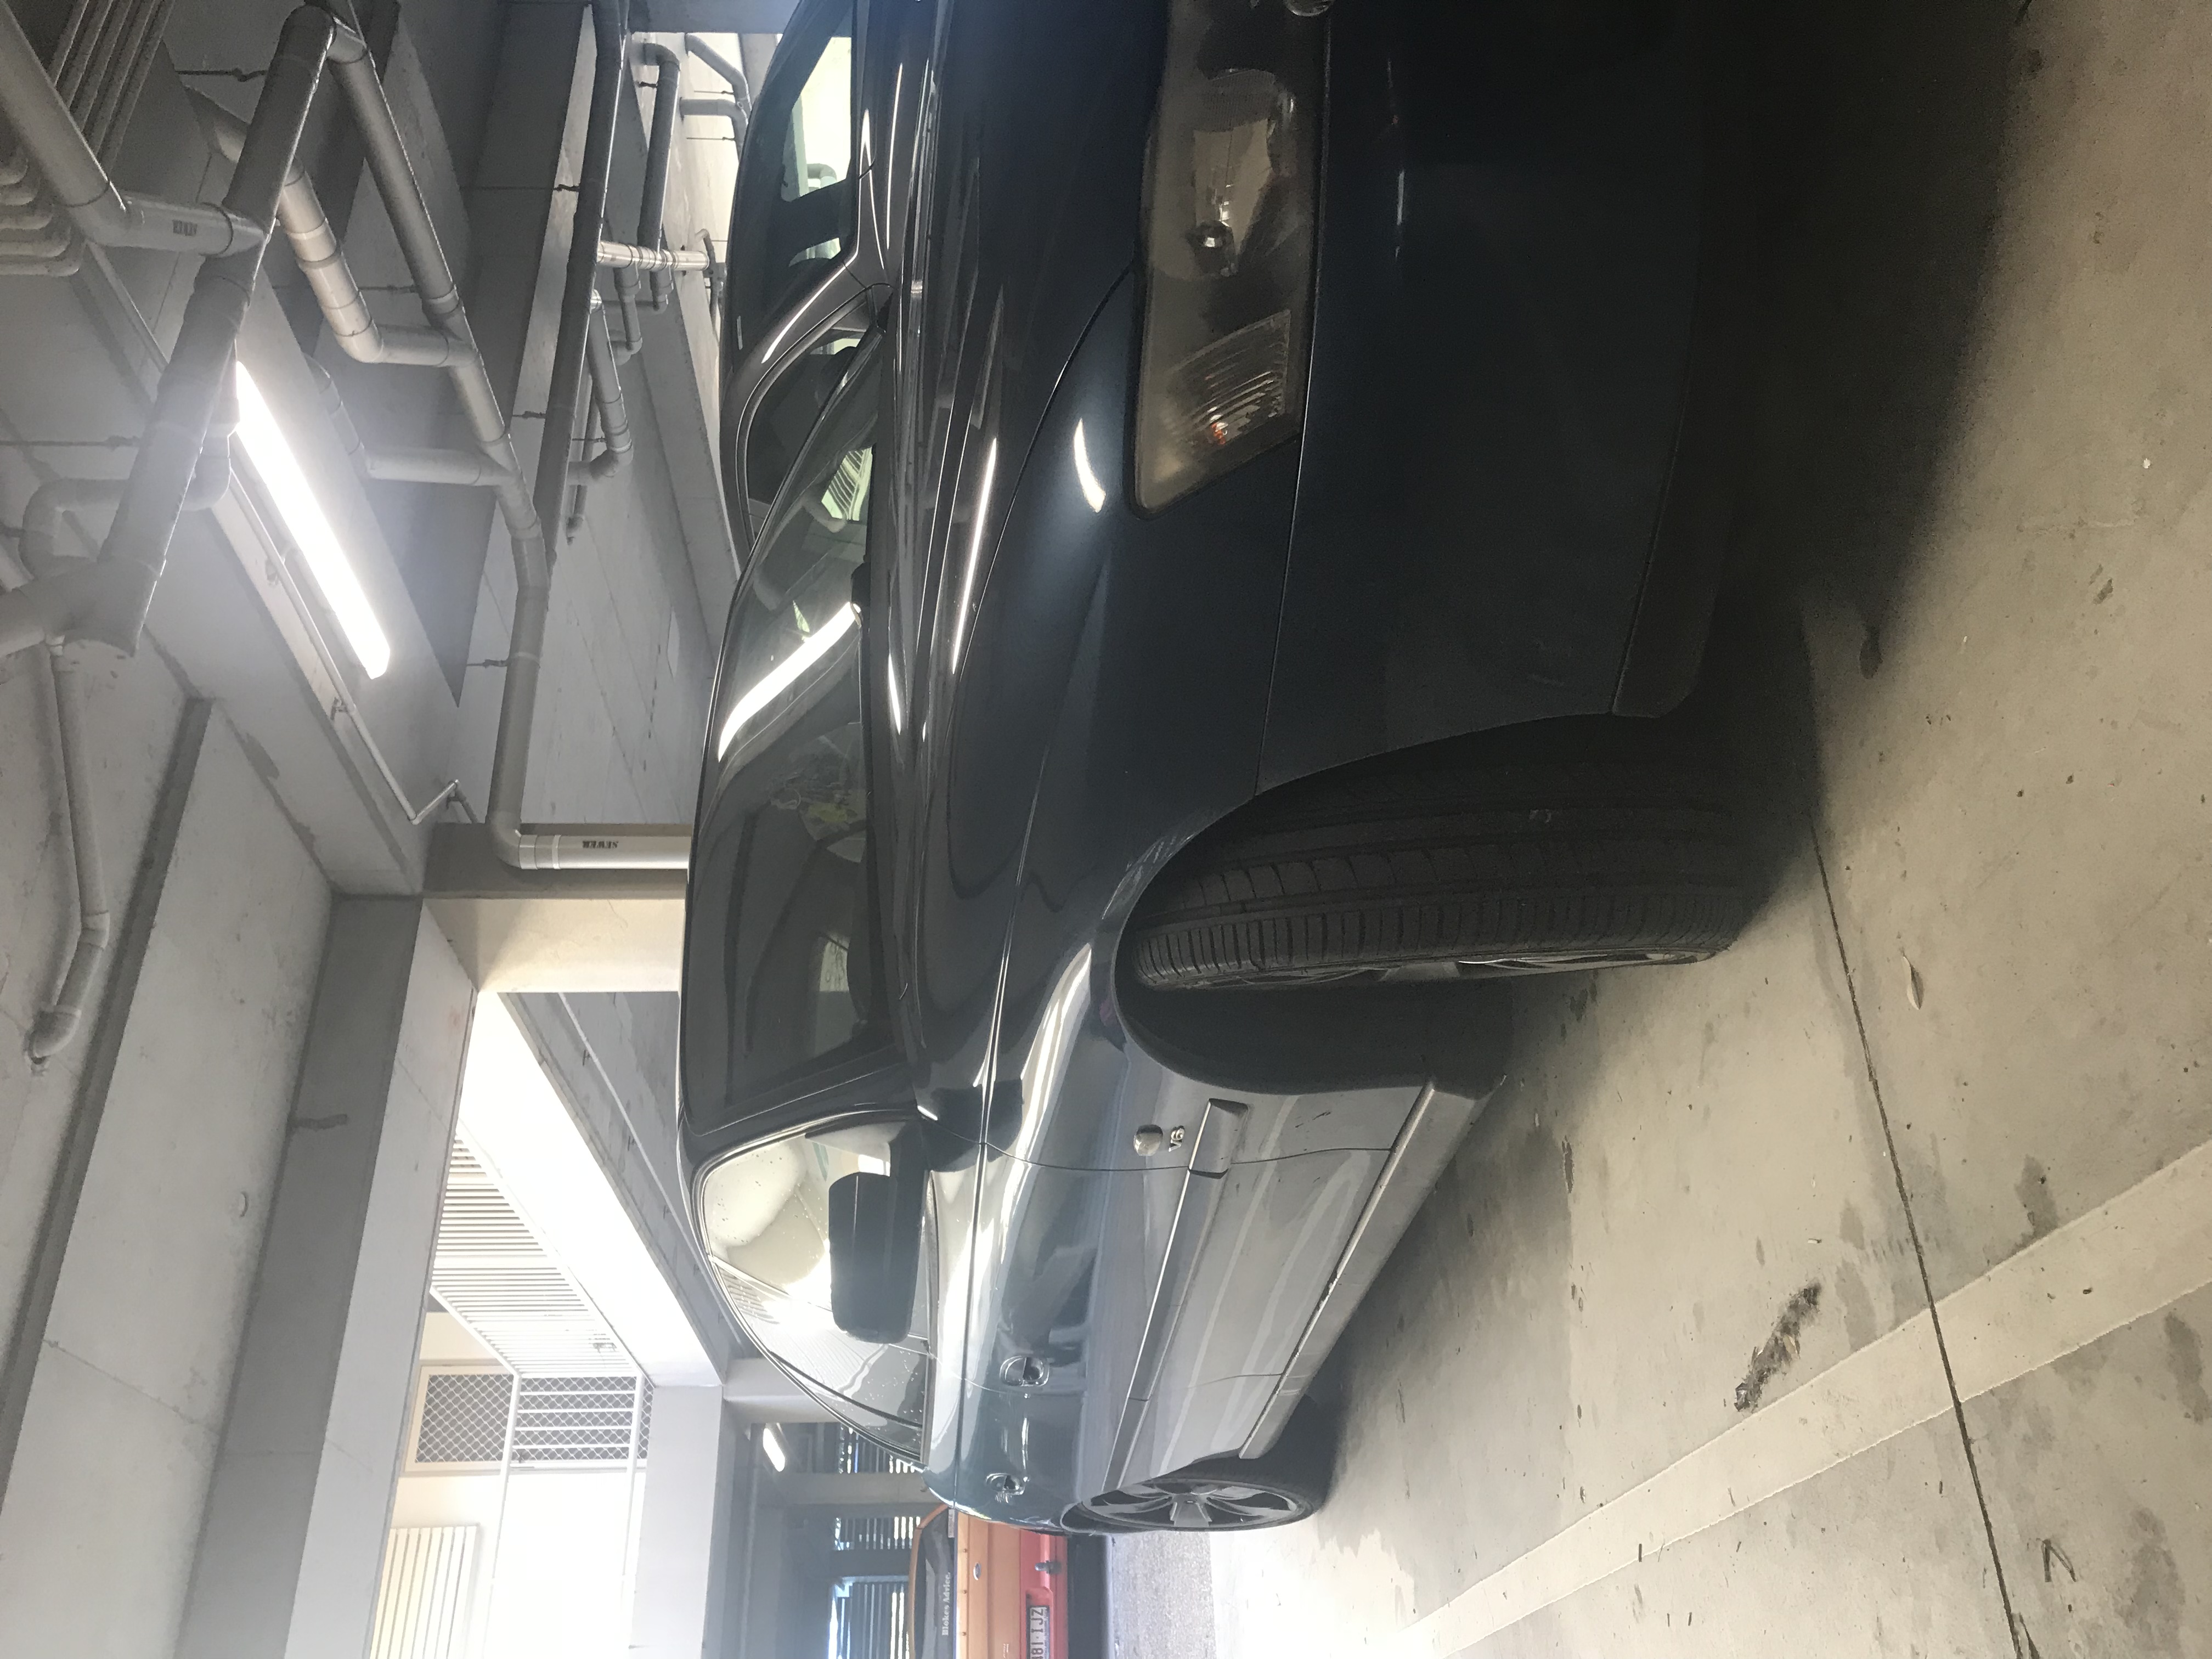 2002 Holden Commodore Acclaim VY